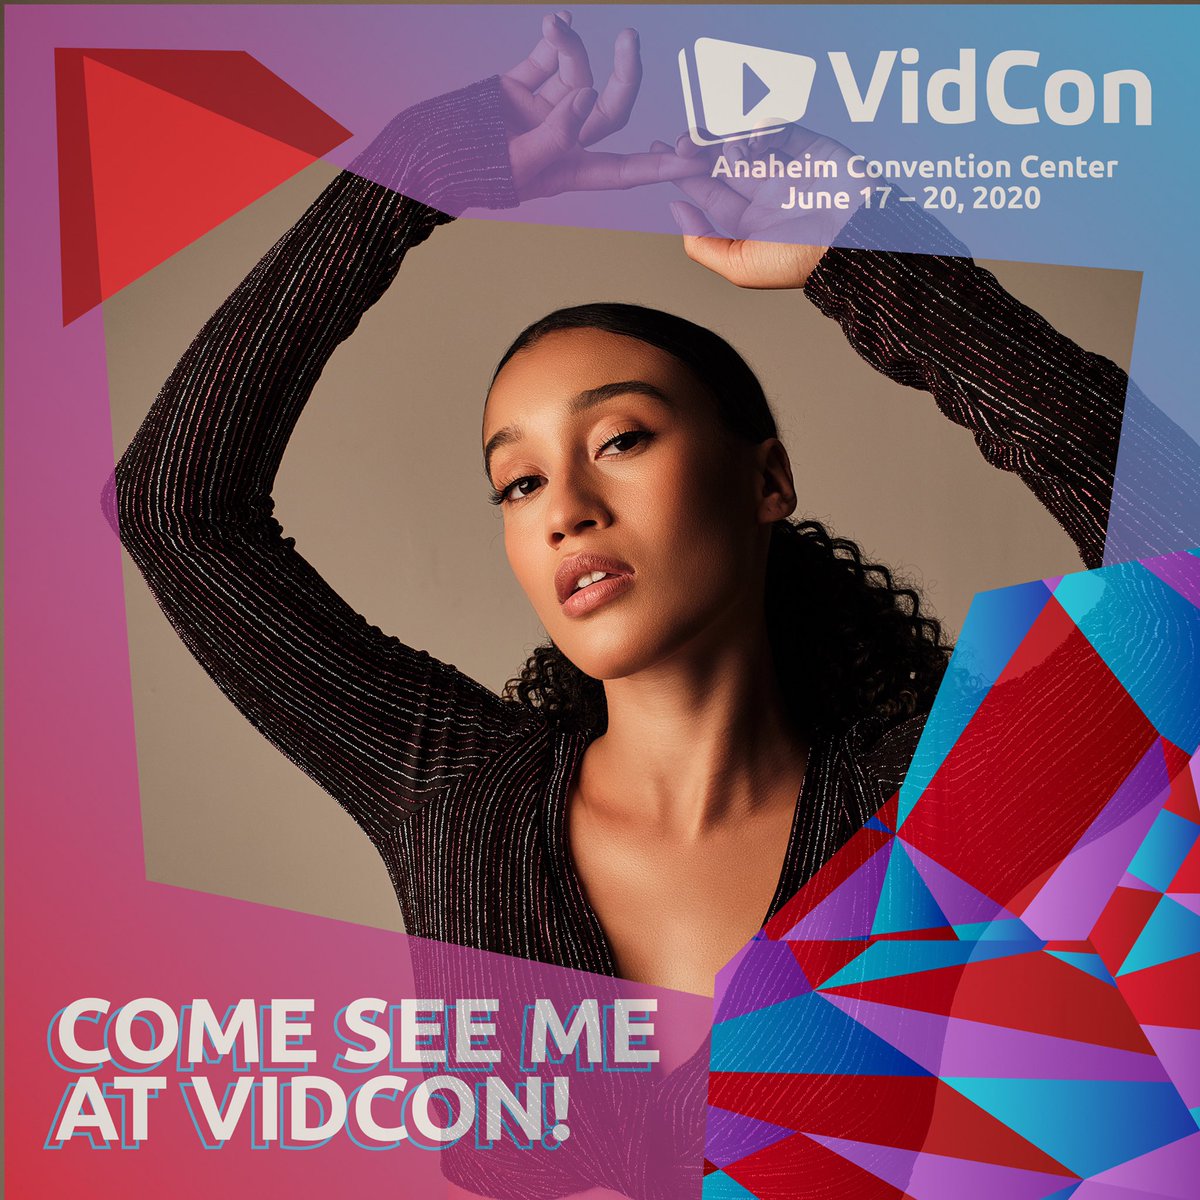 GUYS I’M A FEATURED CREATOR!! AHHHHHHHHH Come celebrate with me at #VidConUS, June 17 - 20! There’s going to be a ton of stuff to see and do, so be sure to buy tickets as soon as they go on sale on 10/8 at VidCon.com. I’ll see you there!